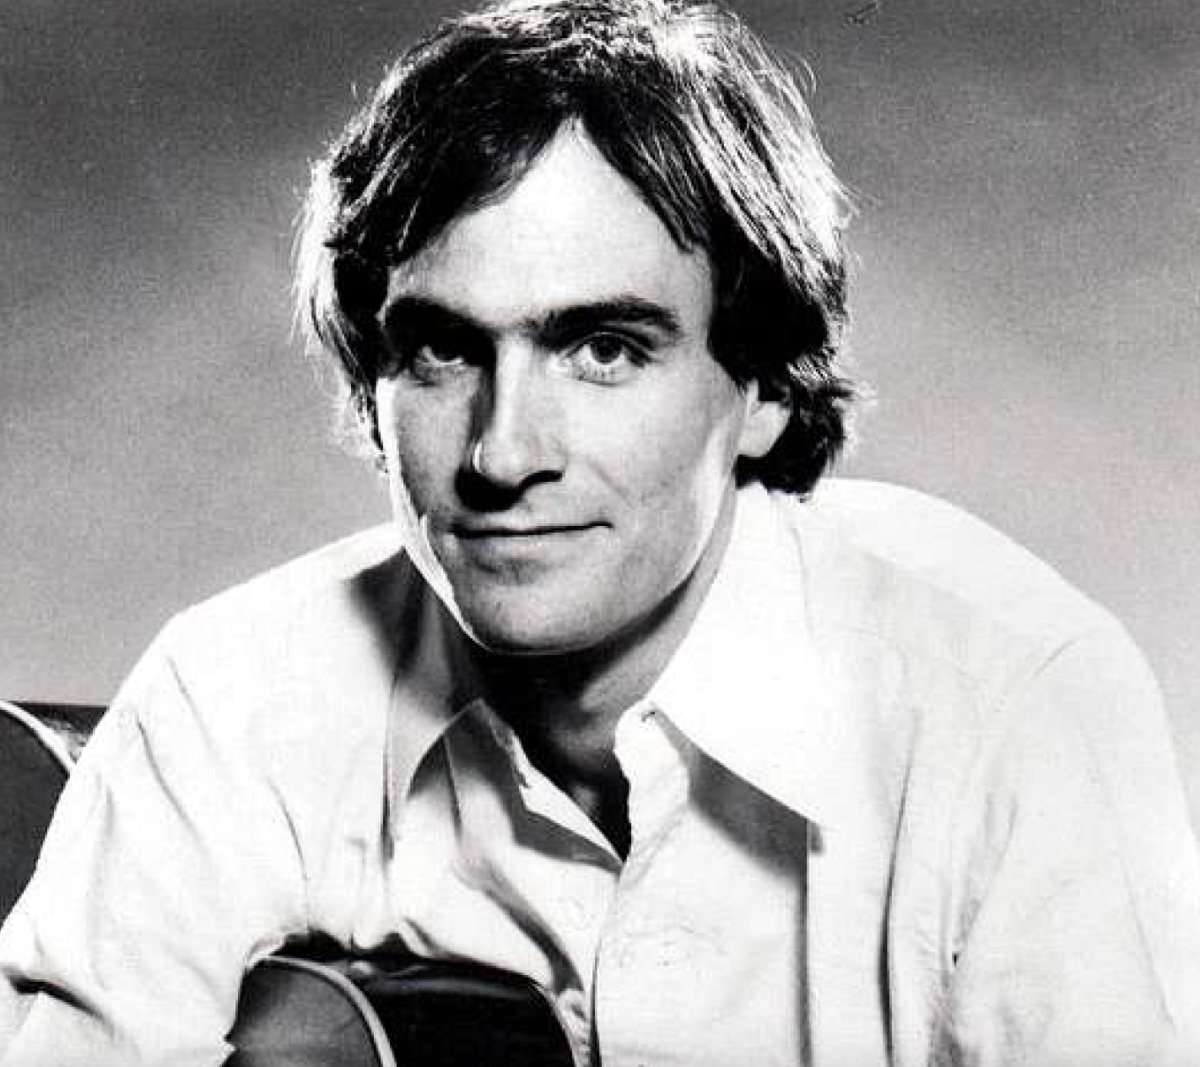 James Taylor was awarded a Presidential Medal of Freedom by President